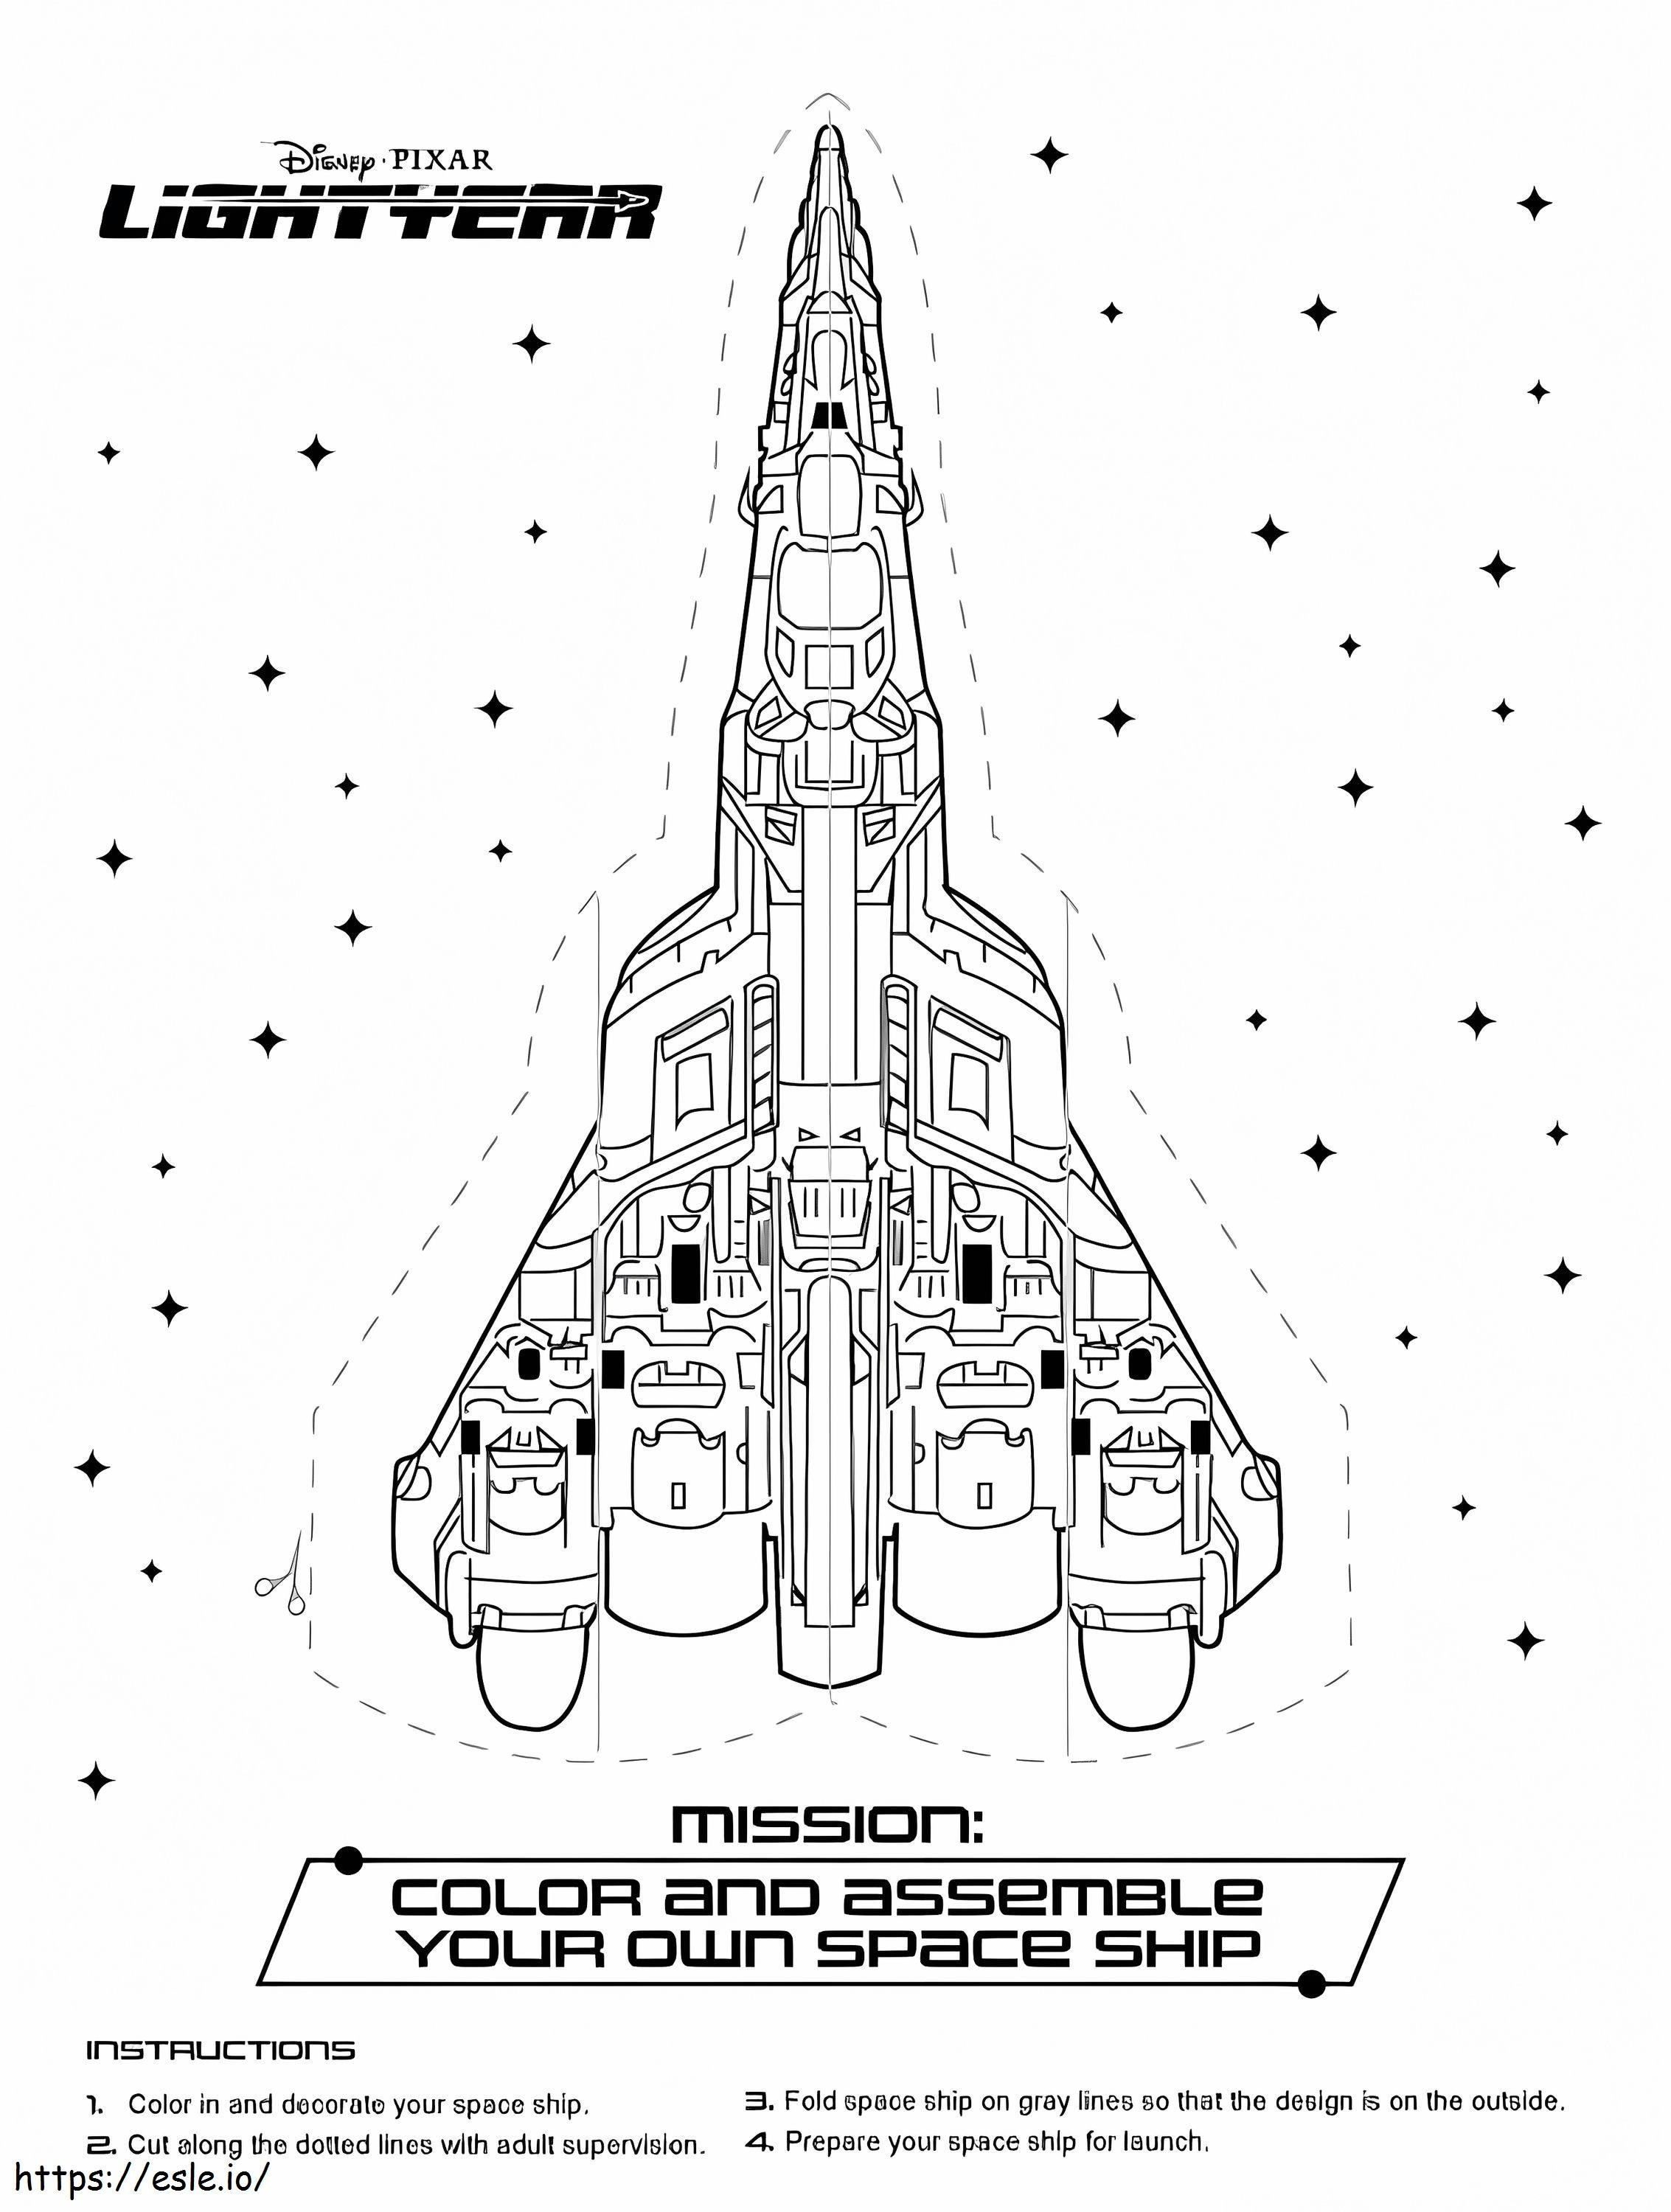 Lightyear Space Ship coloring page